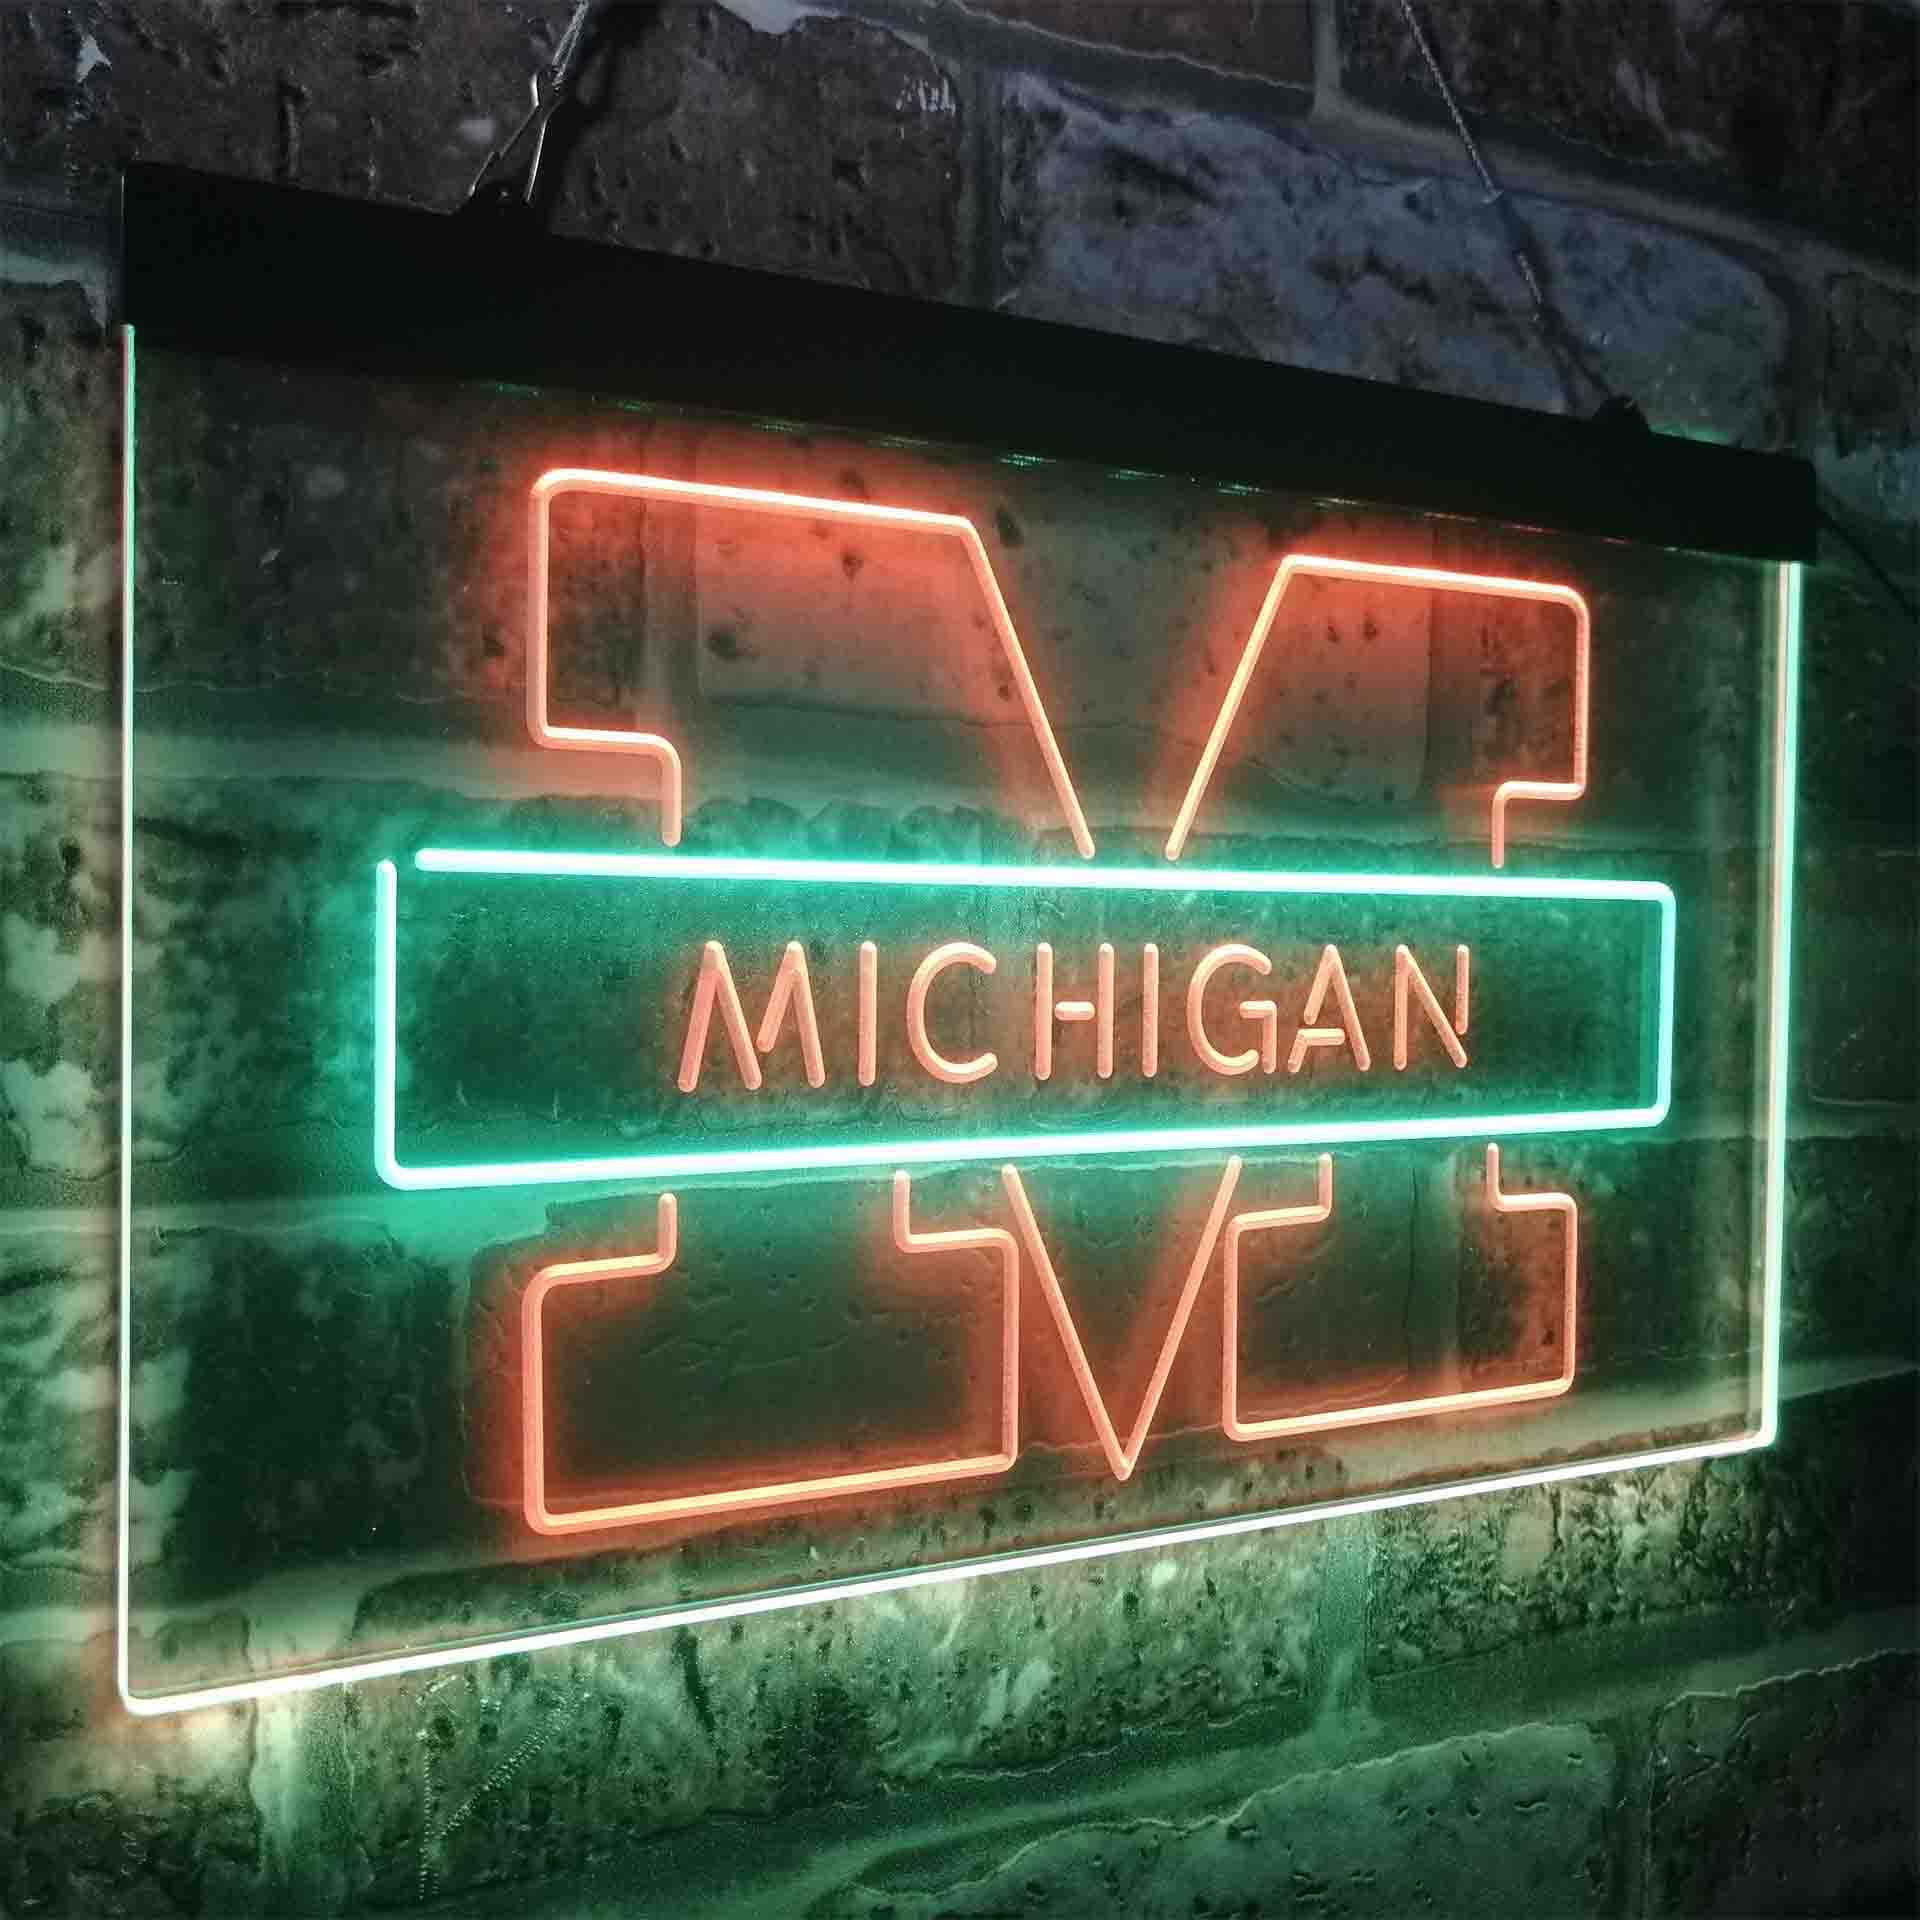 Michigans Sport League Team Wolverines Club LED Neon Sign